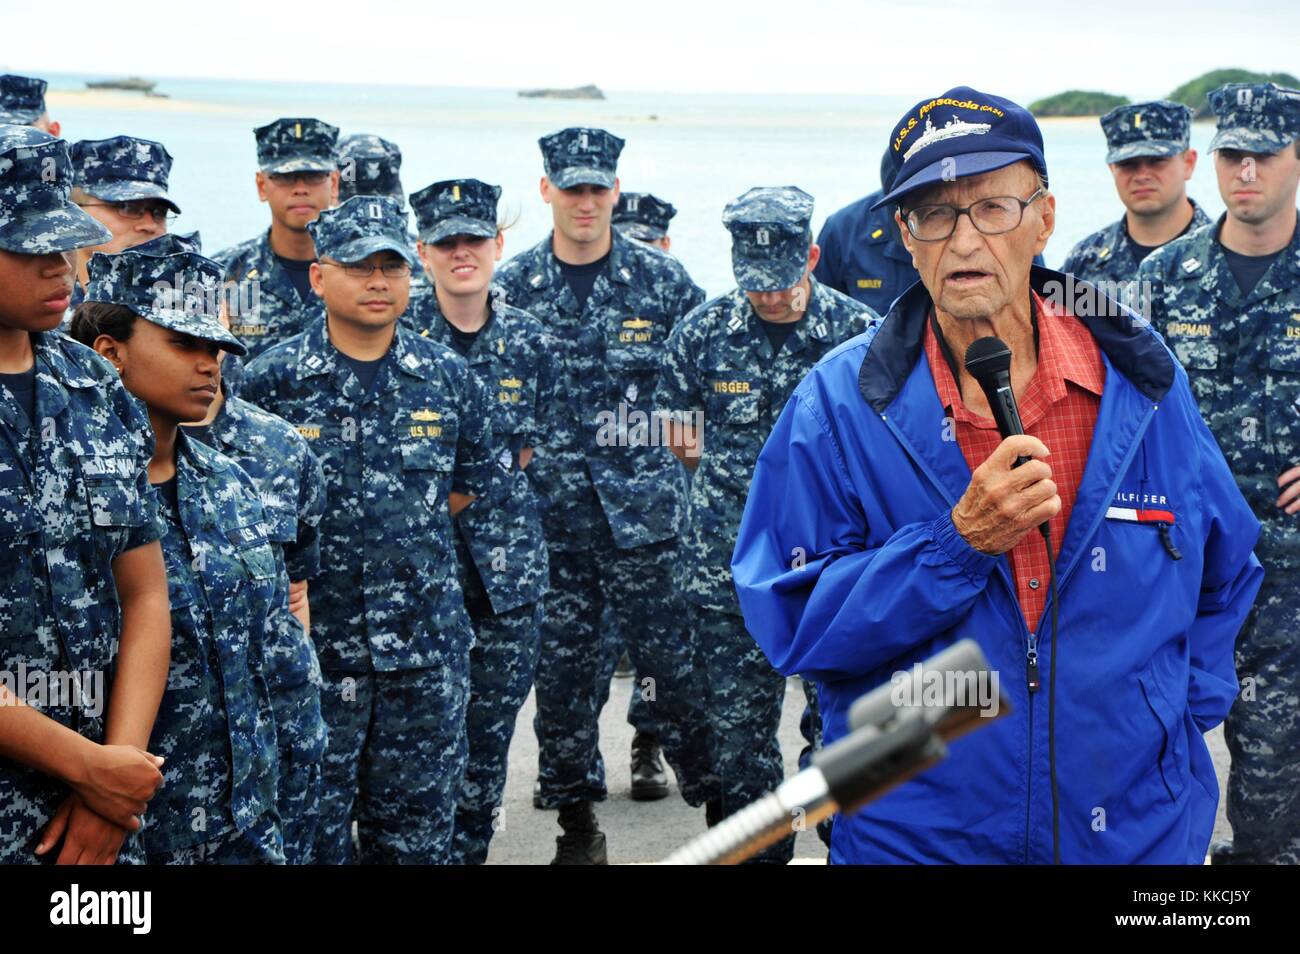 Wayne Heyart, a former enlisted Radioman 1st class petty officer and World War II veteran, speaks about his experiences in the Navy to the crew of the Arleigh Burke-class guided-missile destroyer USS McCampbell DDG 85 during a tour of the ship, Okinawa, Japan. Image courtesy Mass Communication Specialist Seaman Declan Barnes/US Navy, 2012. Stock Photo